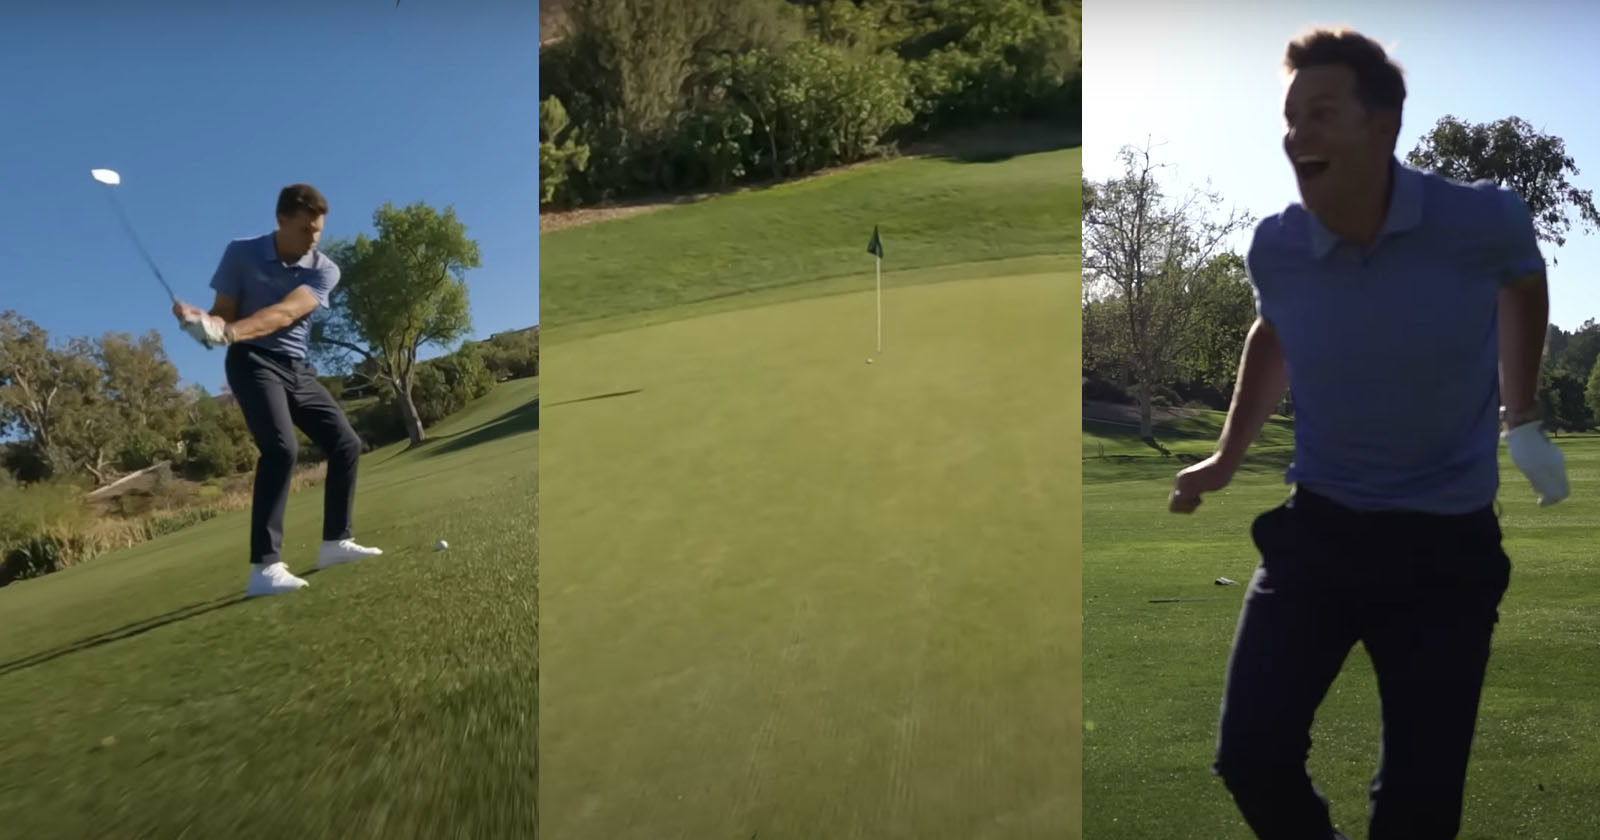 Real or Fake: Tom Bradys Epic Hole-in-One Caught by FPV Drone